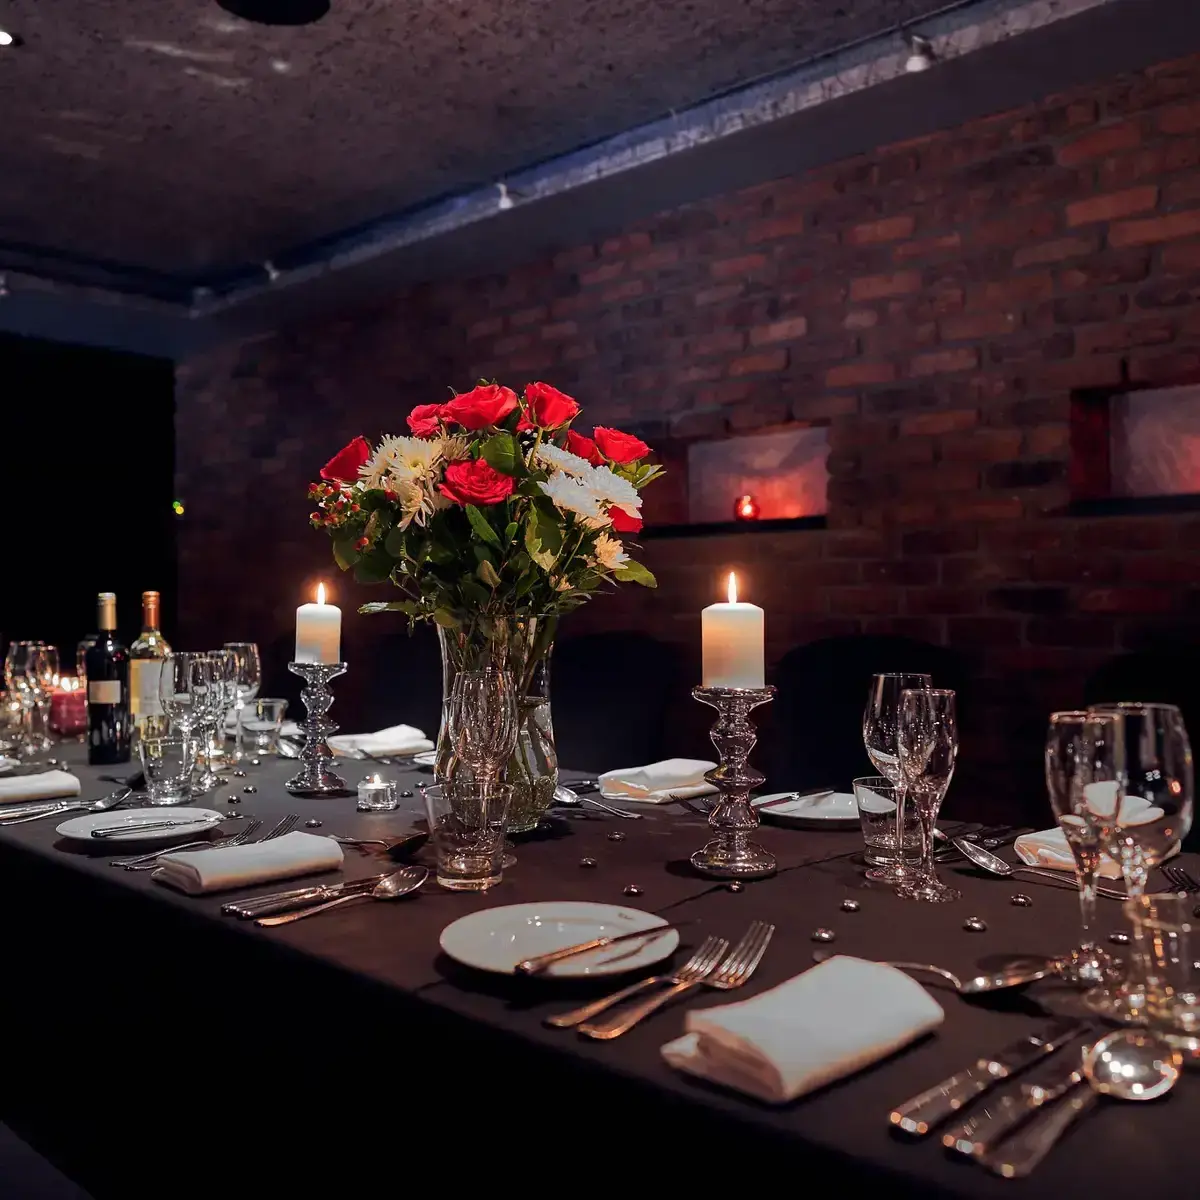 Private dining room featuring a table laid for dinner service, white candles in silver candlesticks, and a red and white floral centrepiece.